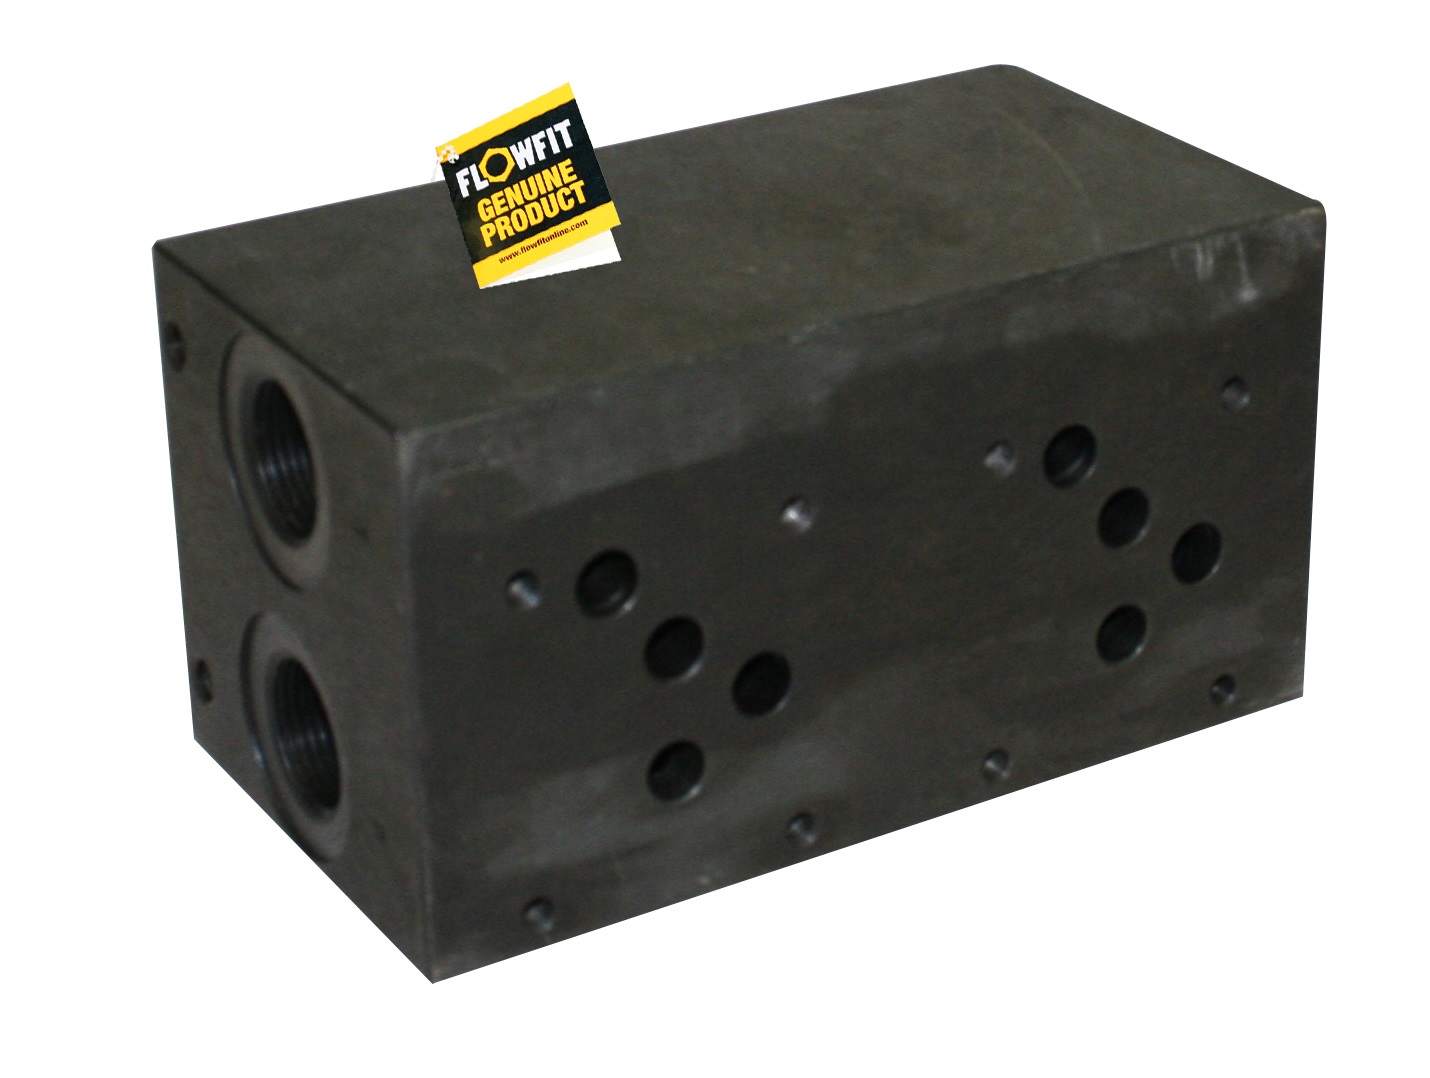 Flowfit hydraulic cetop 5 1 station steel manifold with relief valve cavity